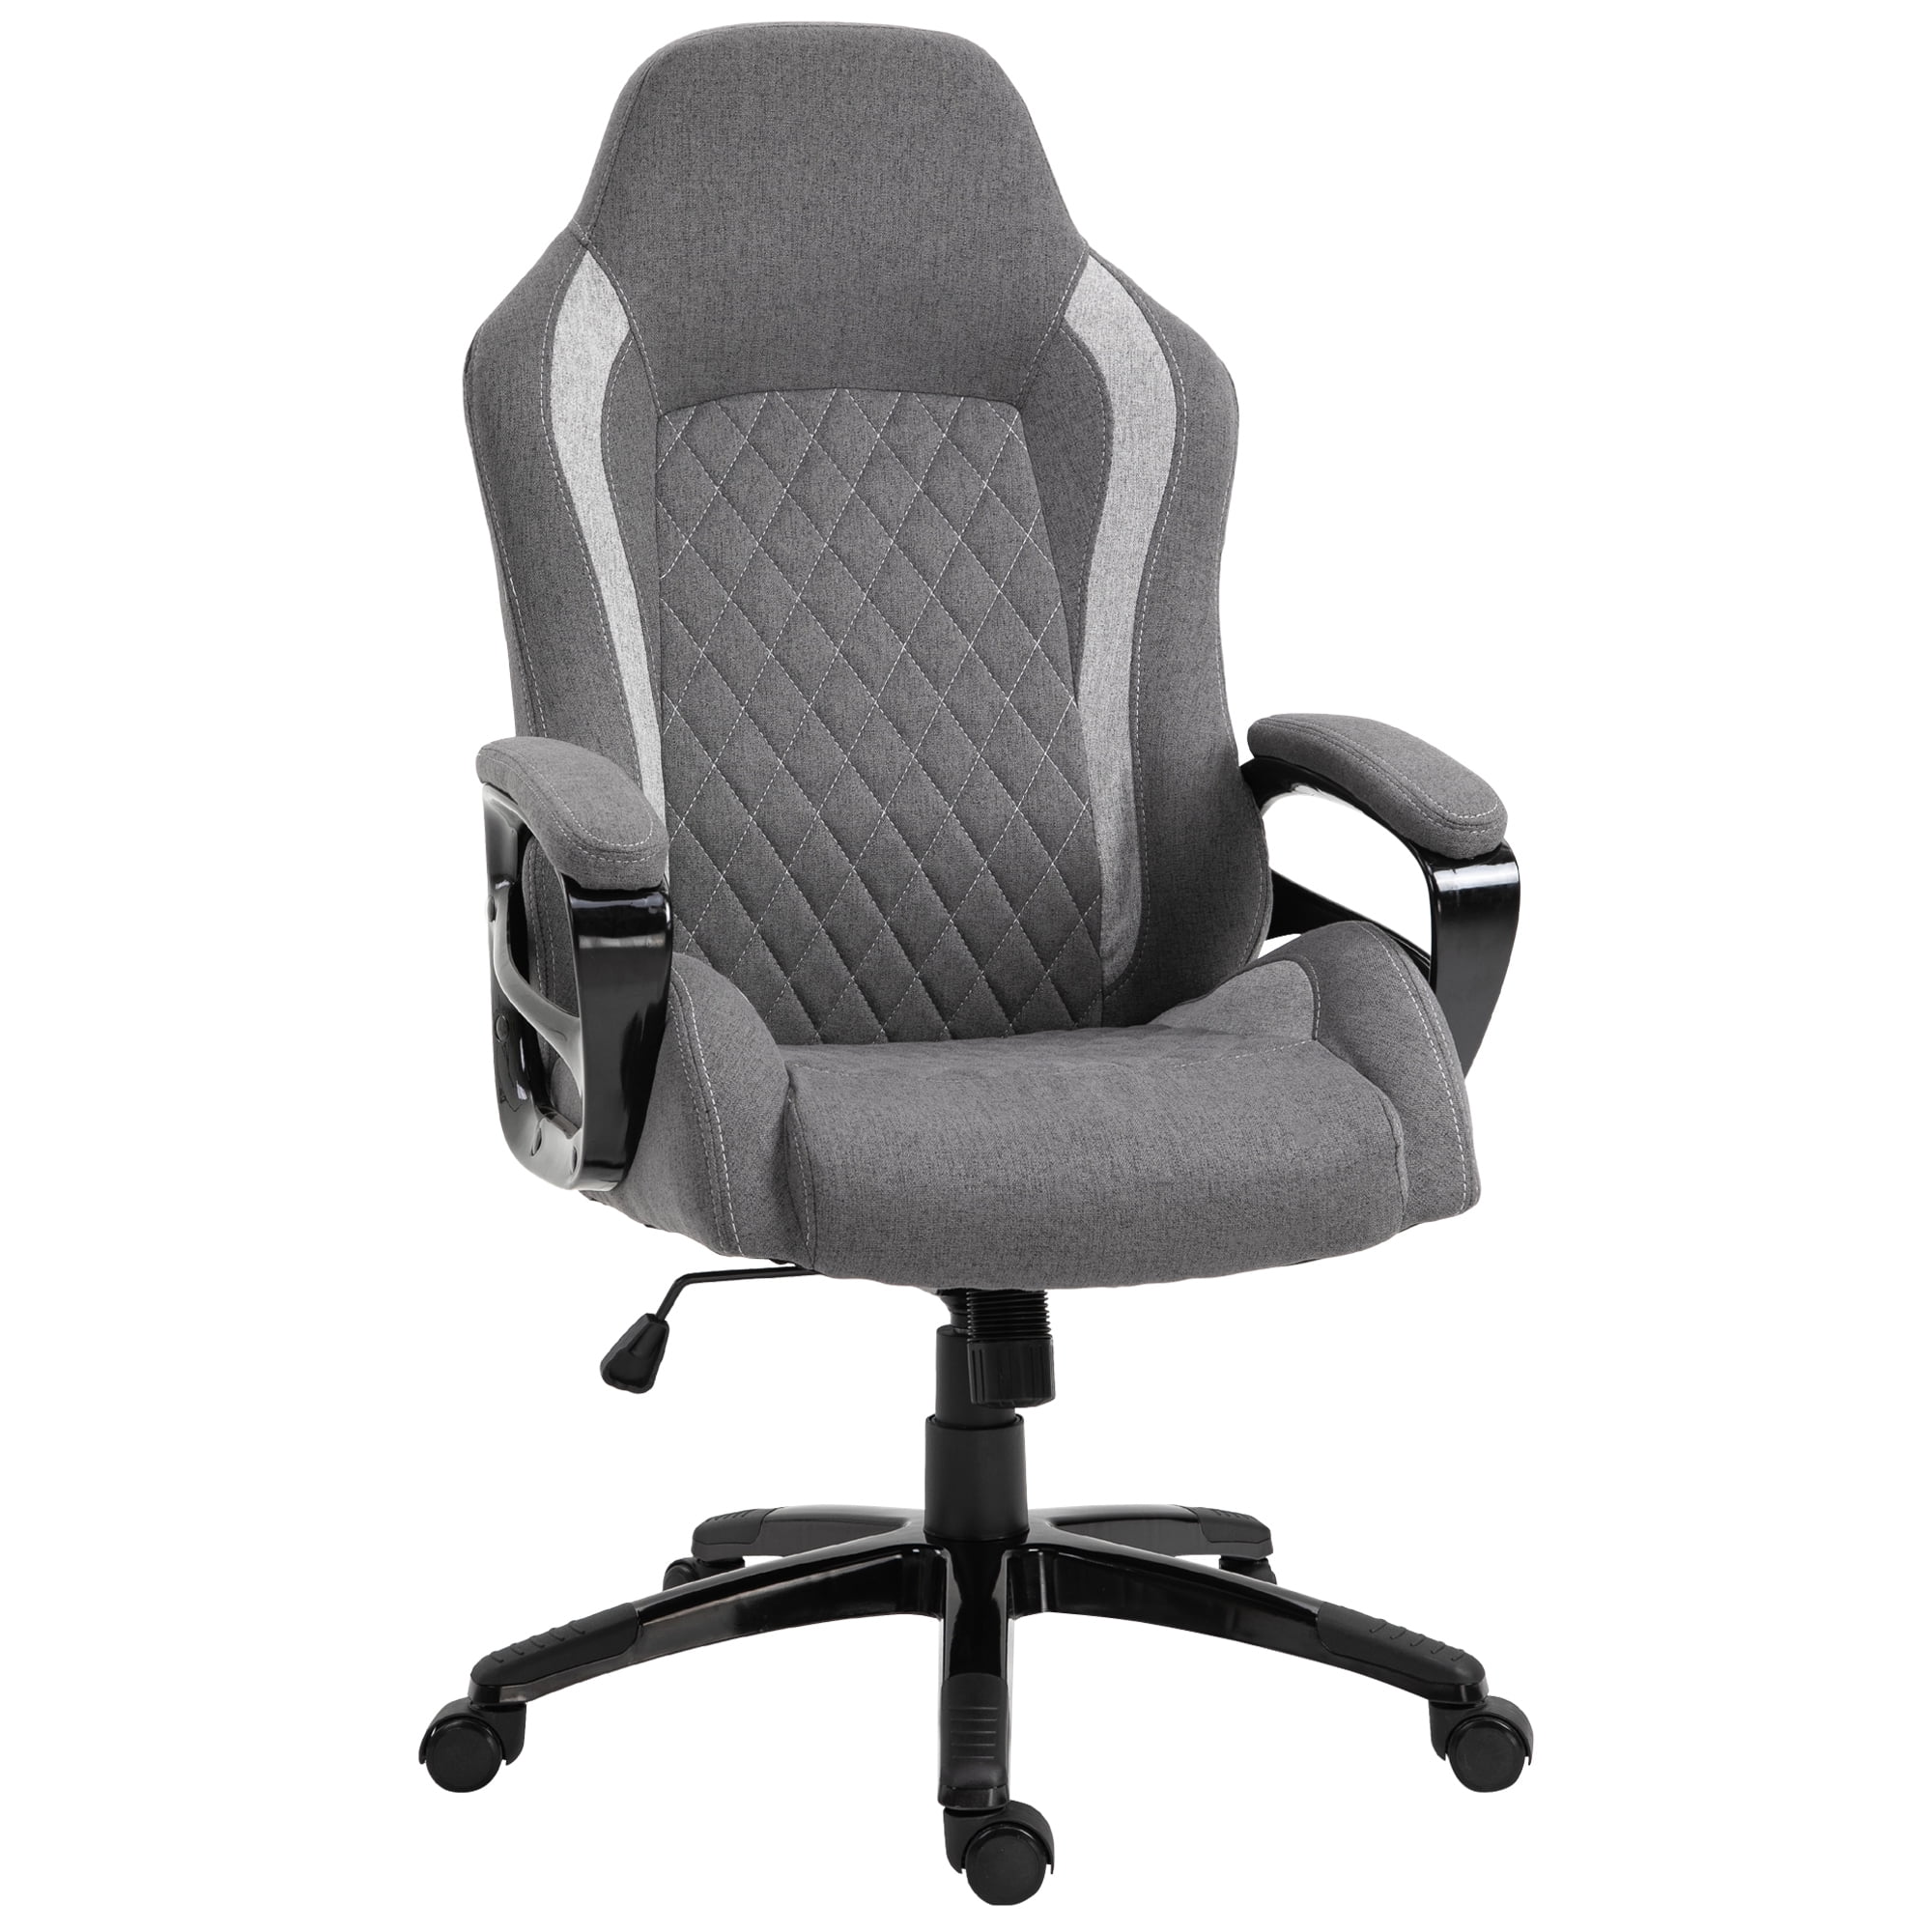 Black Vinsetto Ergonomic Office Chair Adjustable Height Soft Padded Home Chair 